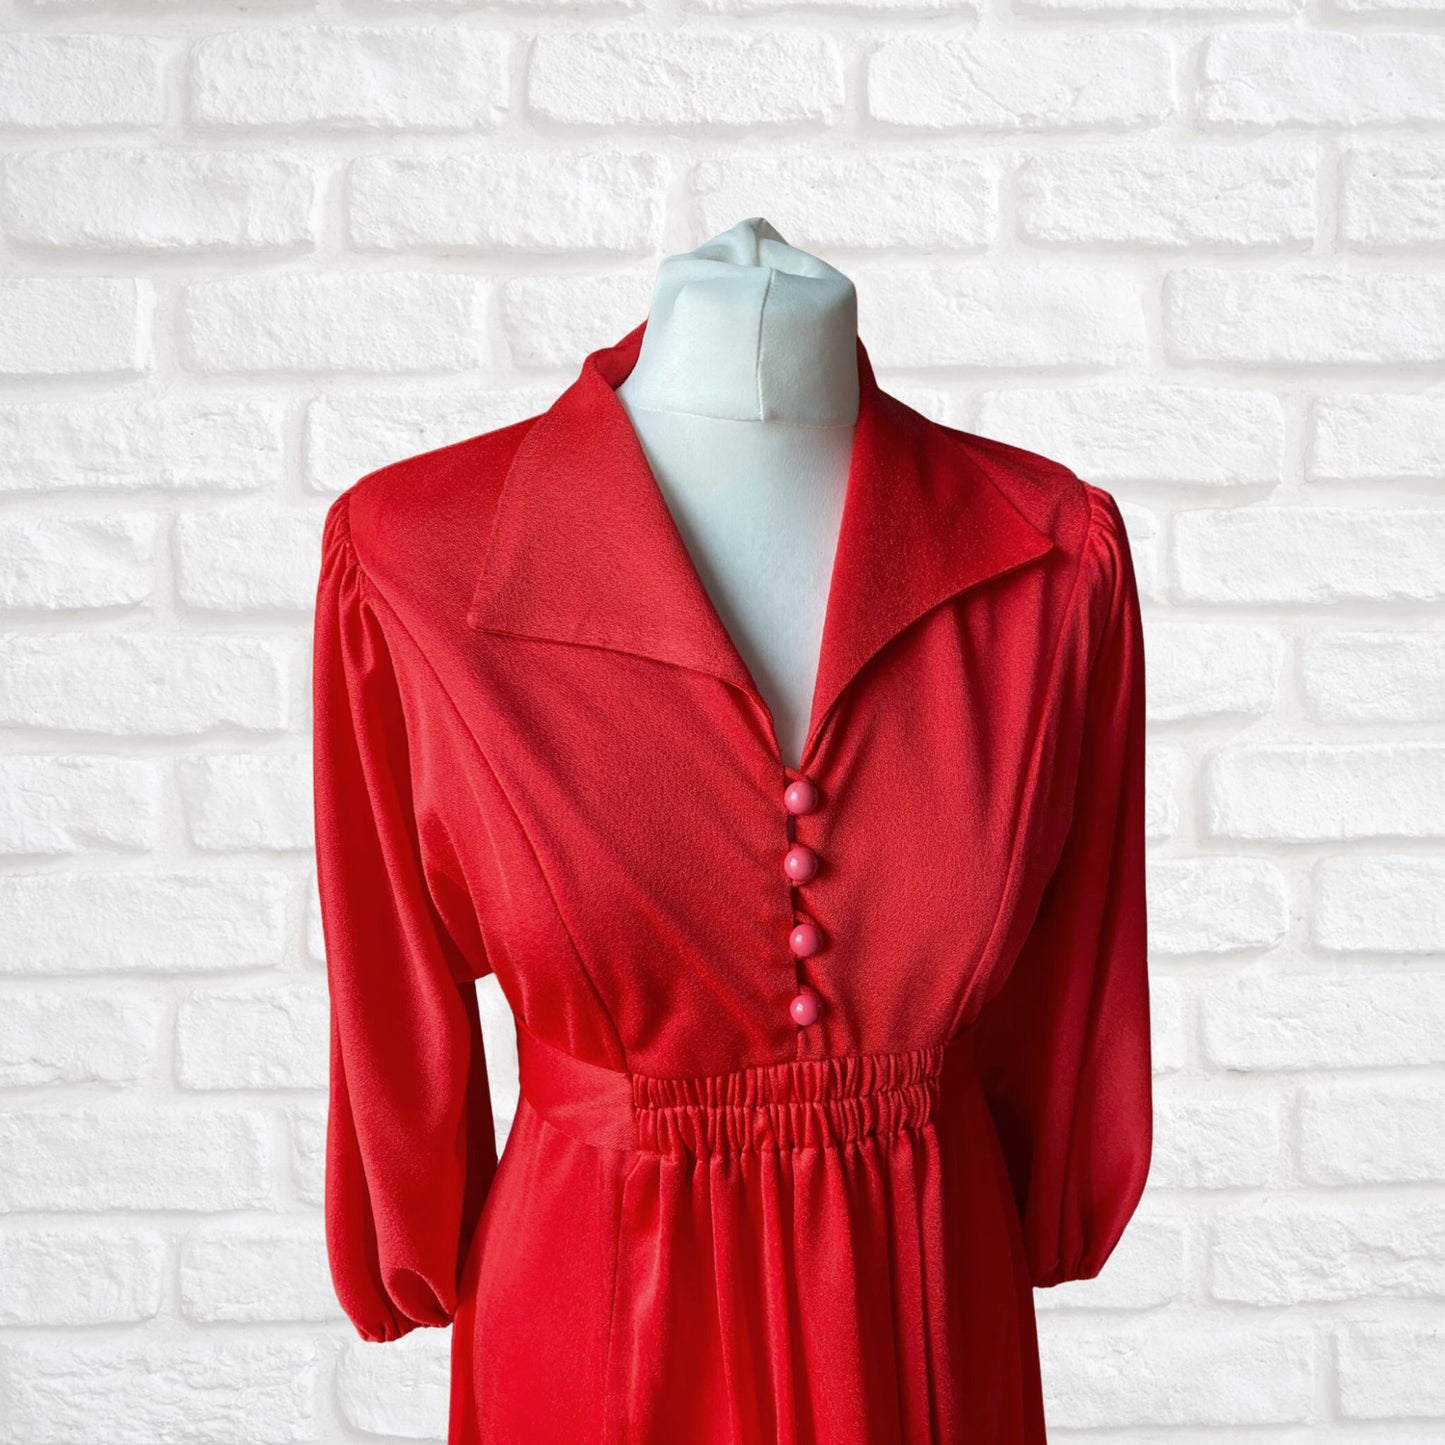 Red 70s Vintage Dress with Dagger Collar and Balloon Sleeves. Approx UK size 10 -12